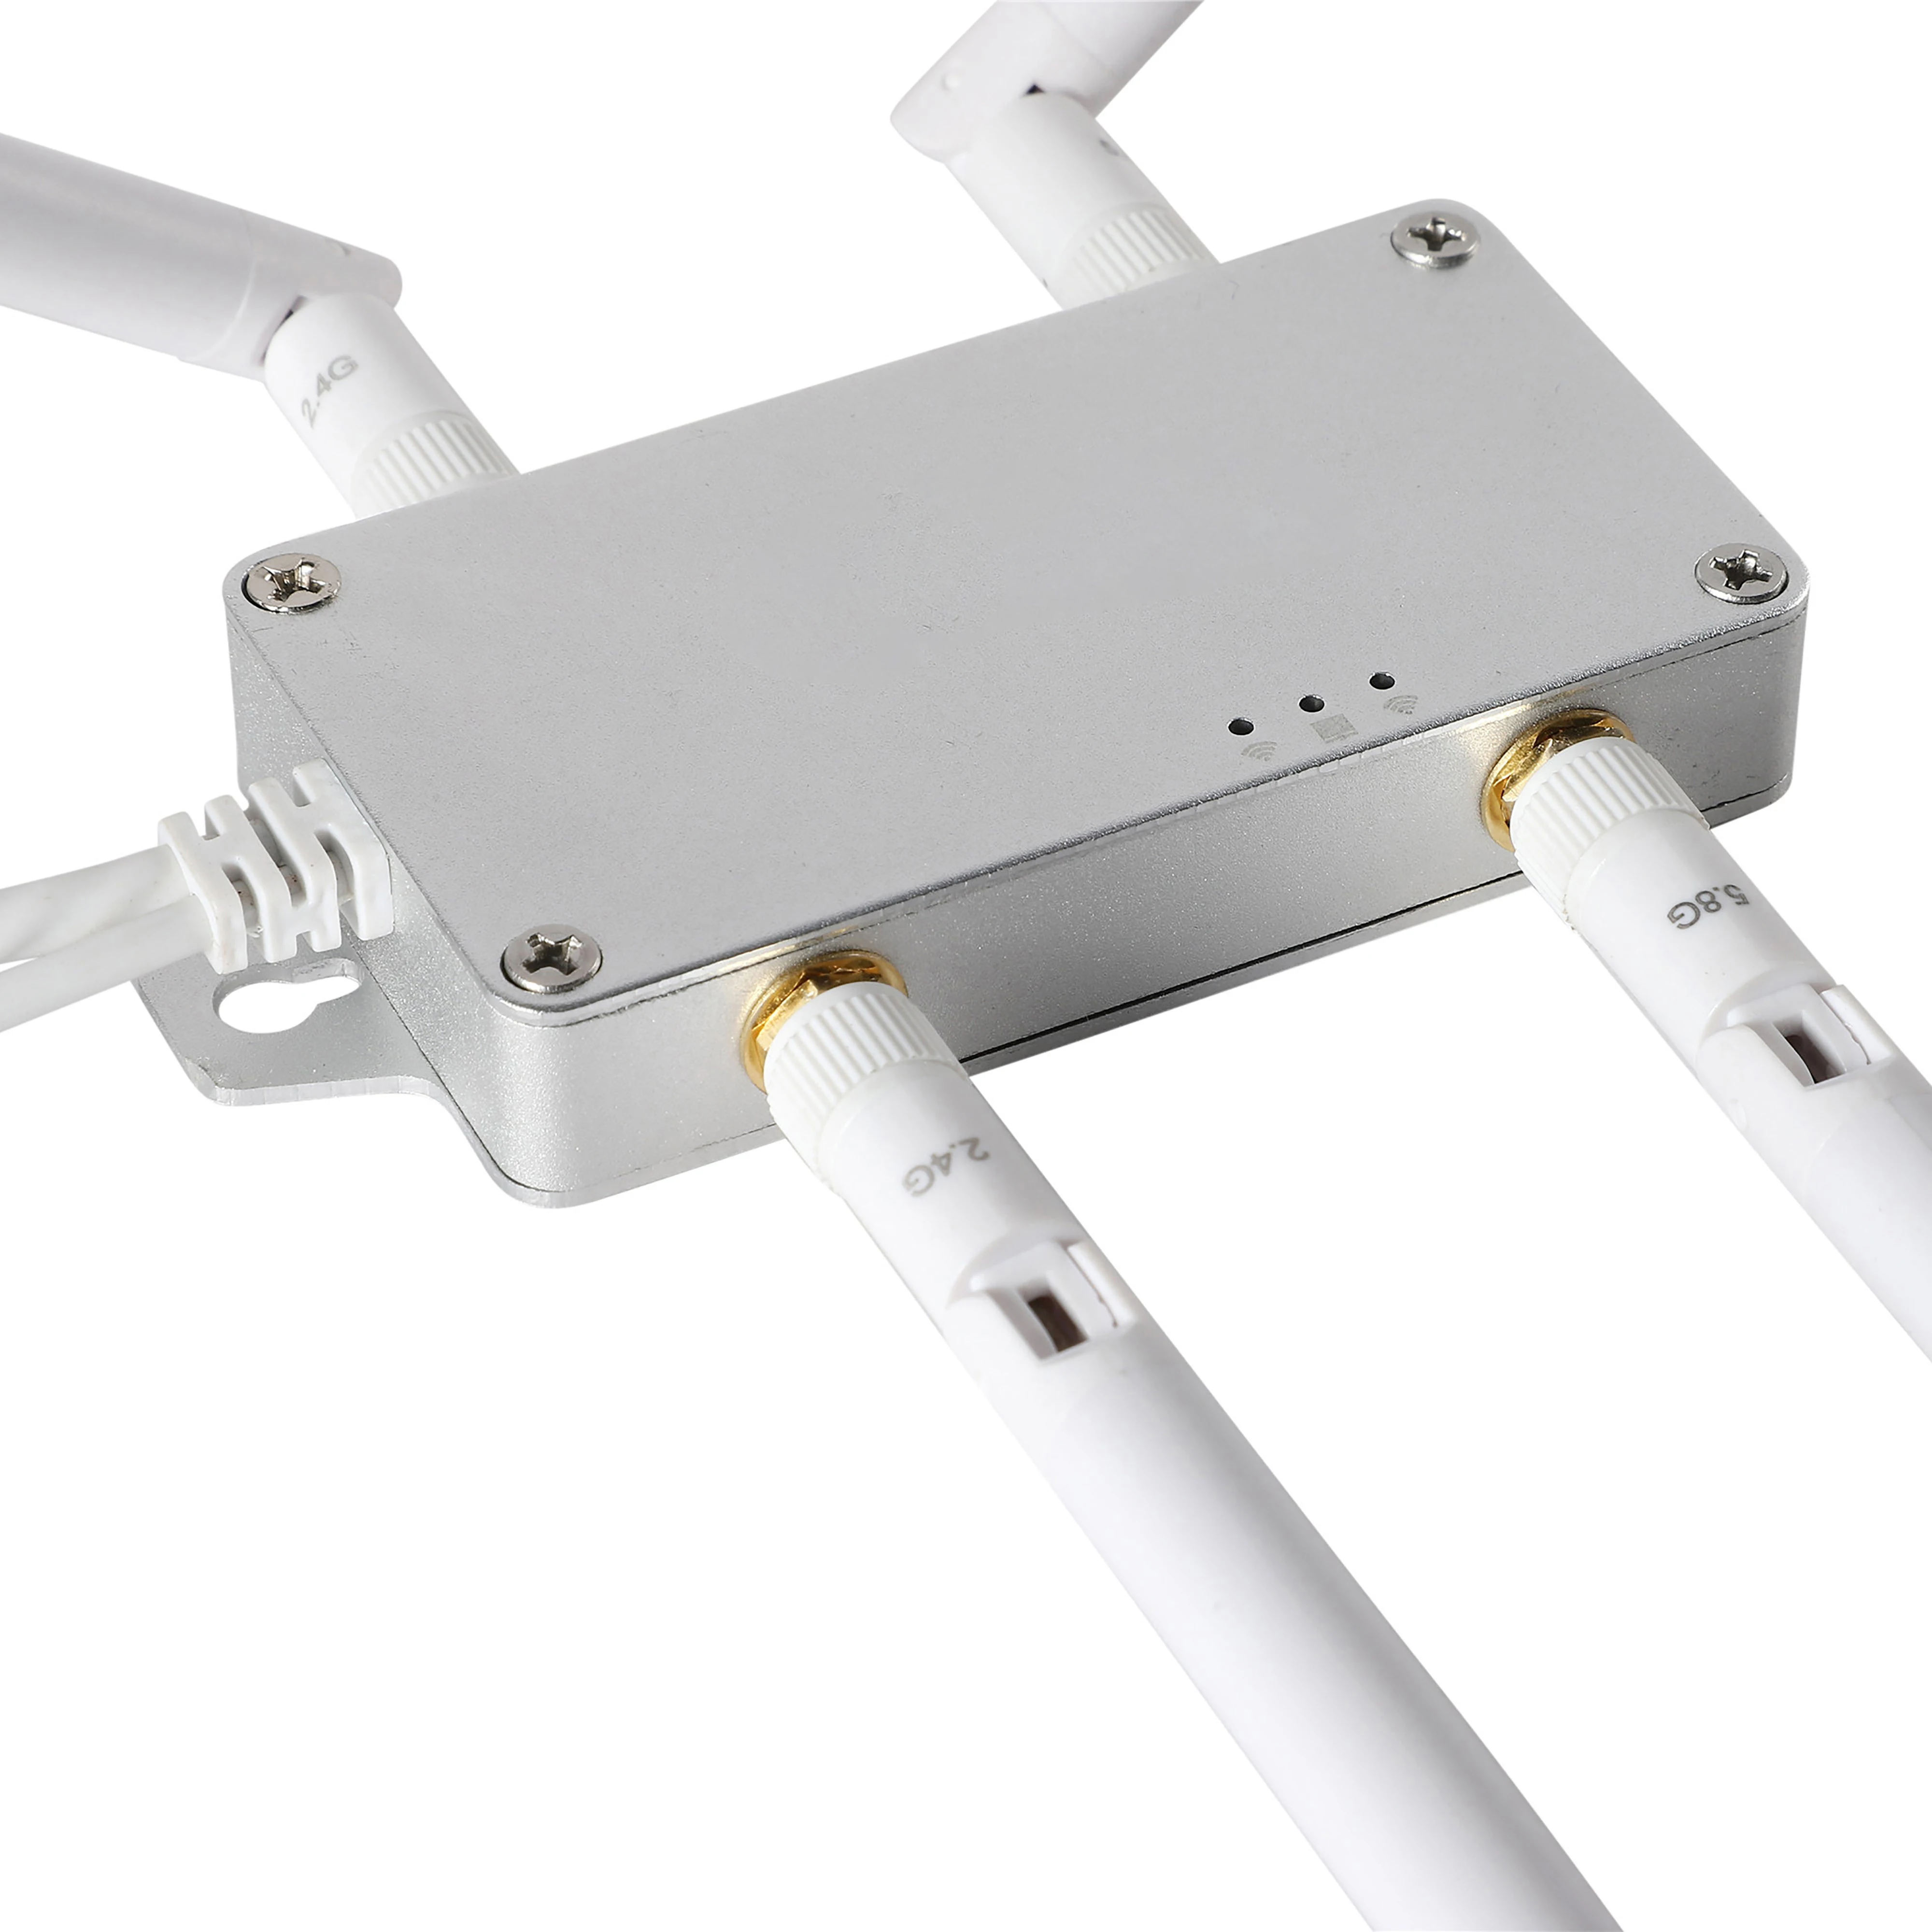 Dual Band 2.4 Ghz/5 ghz VBG1200 Industriële High Power WiFi Bridge Draadloze Router/Repeater Ethernet Wifi-Adapter 4 Antennes